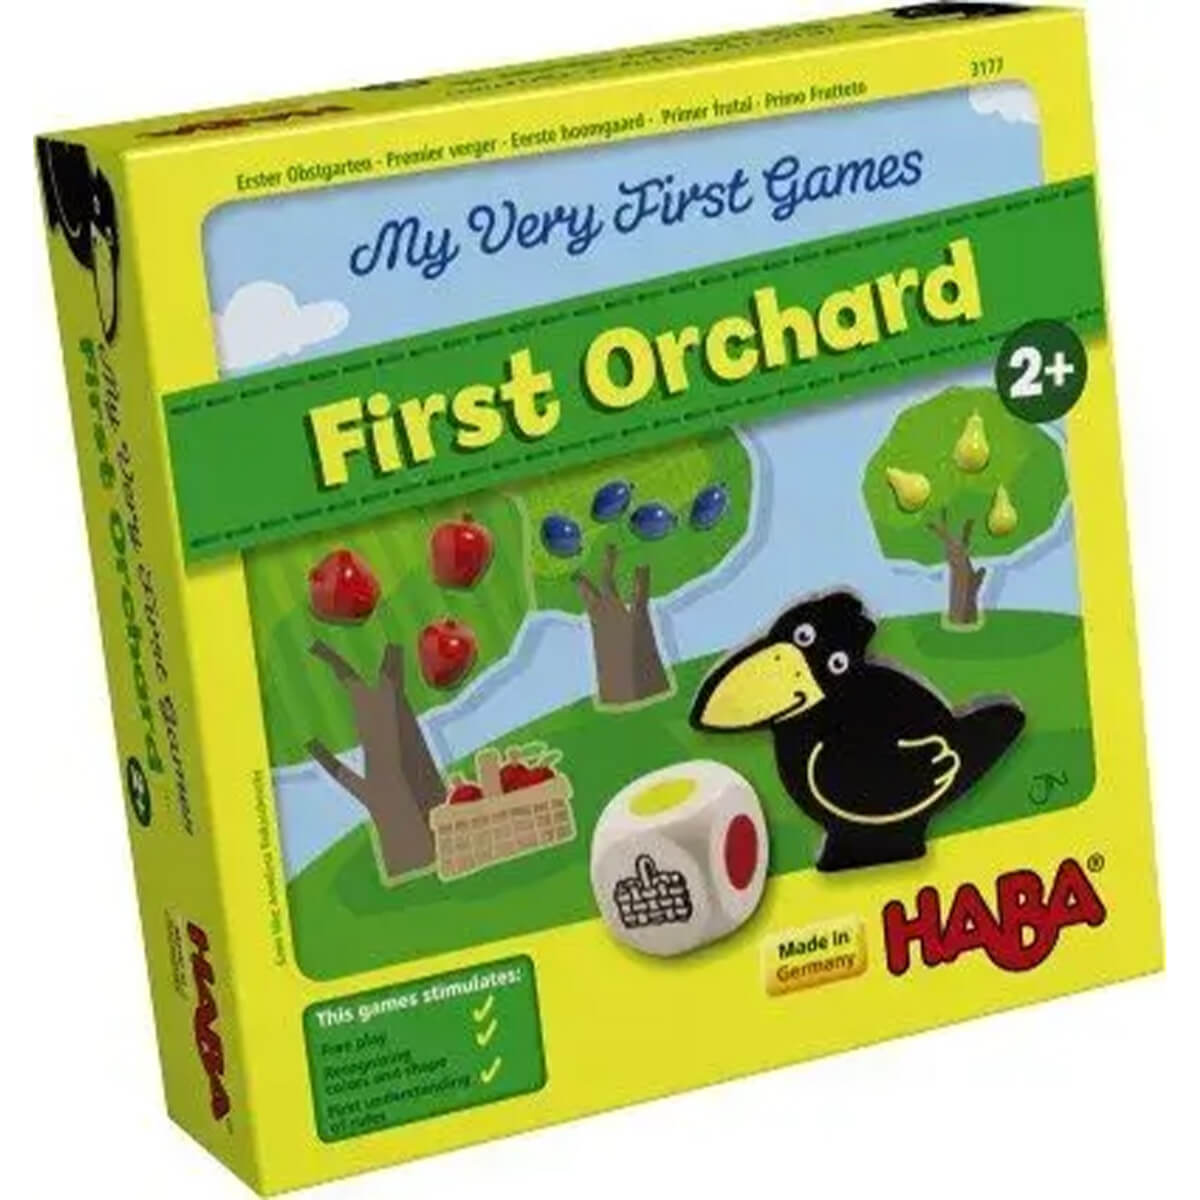 My Very First Games – My First Orchard.